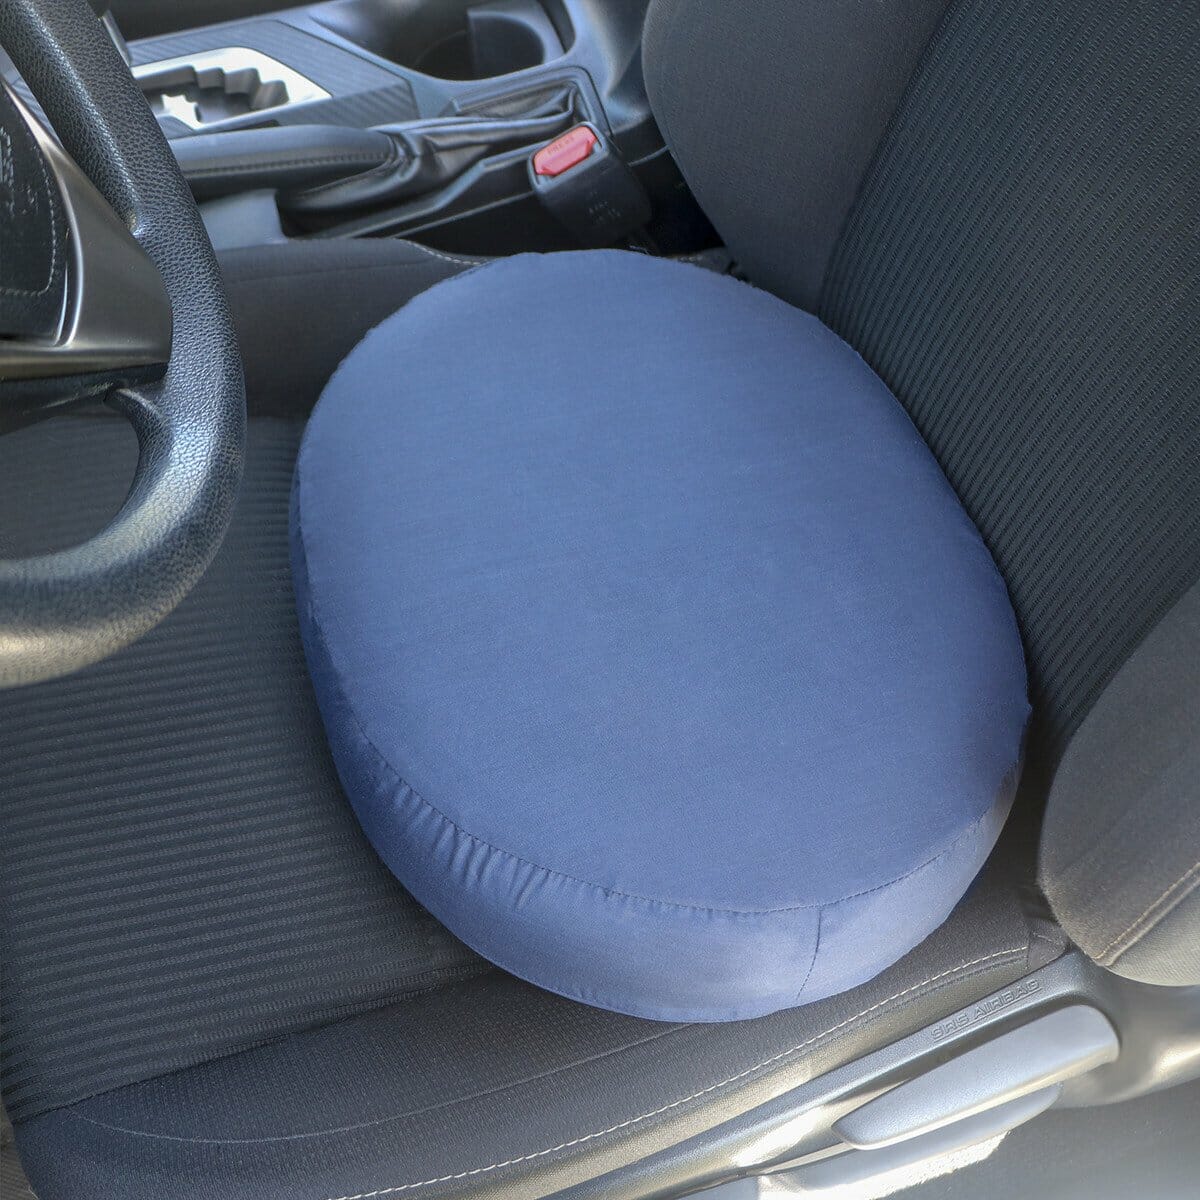 Donut Pillow Seat Cushion with High Density Foam - Welcome to